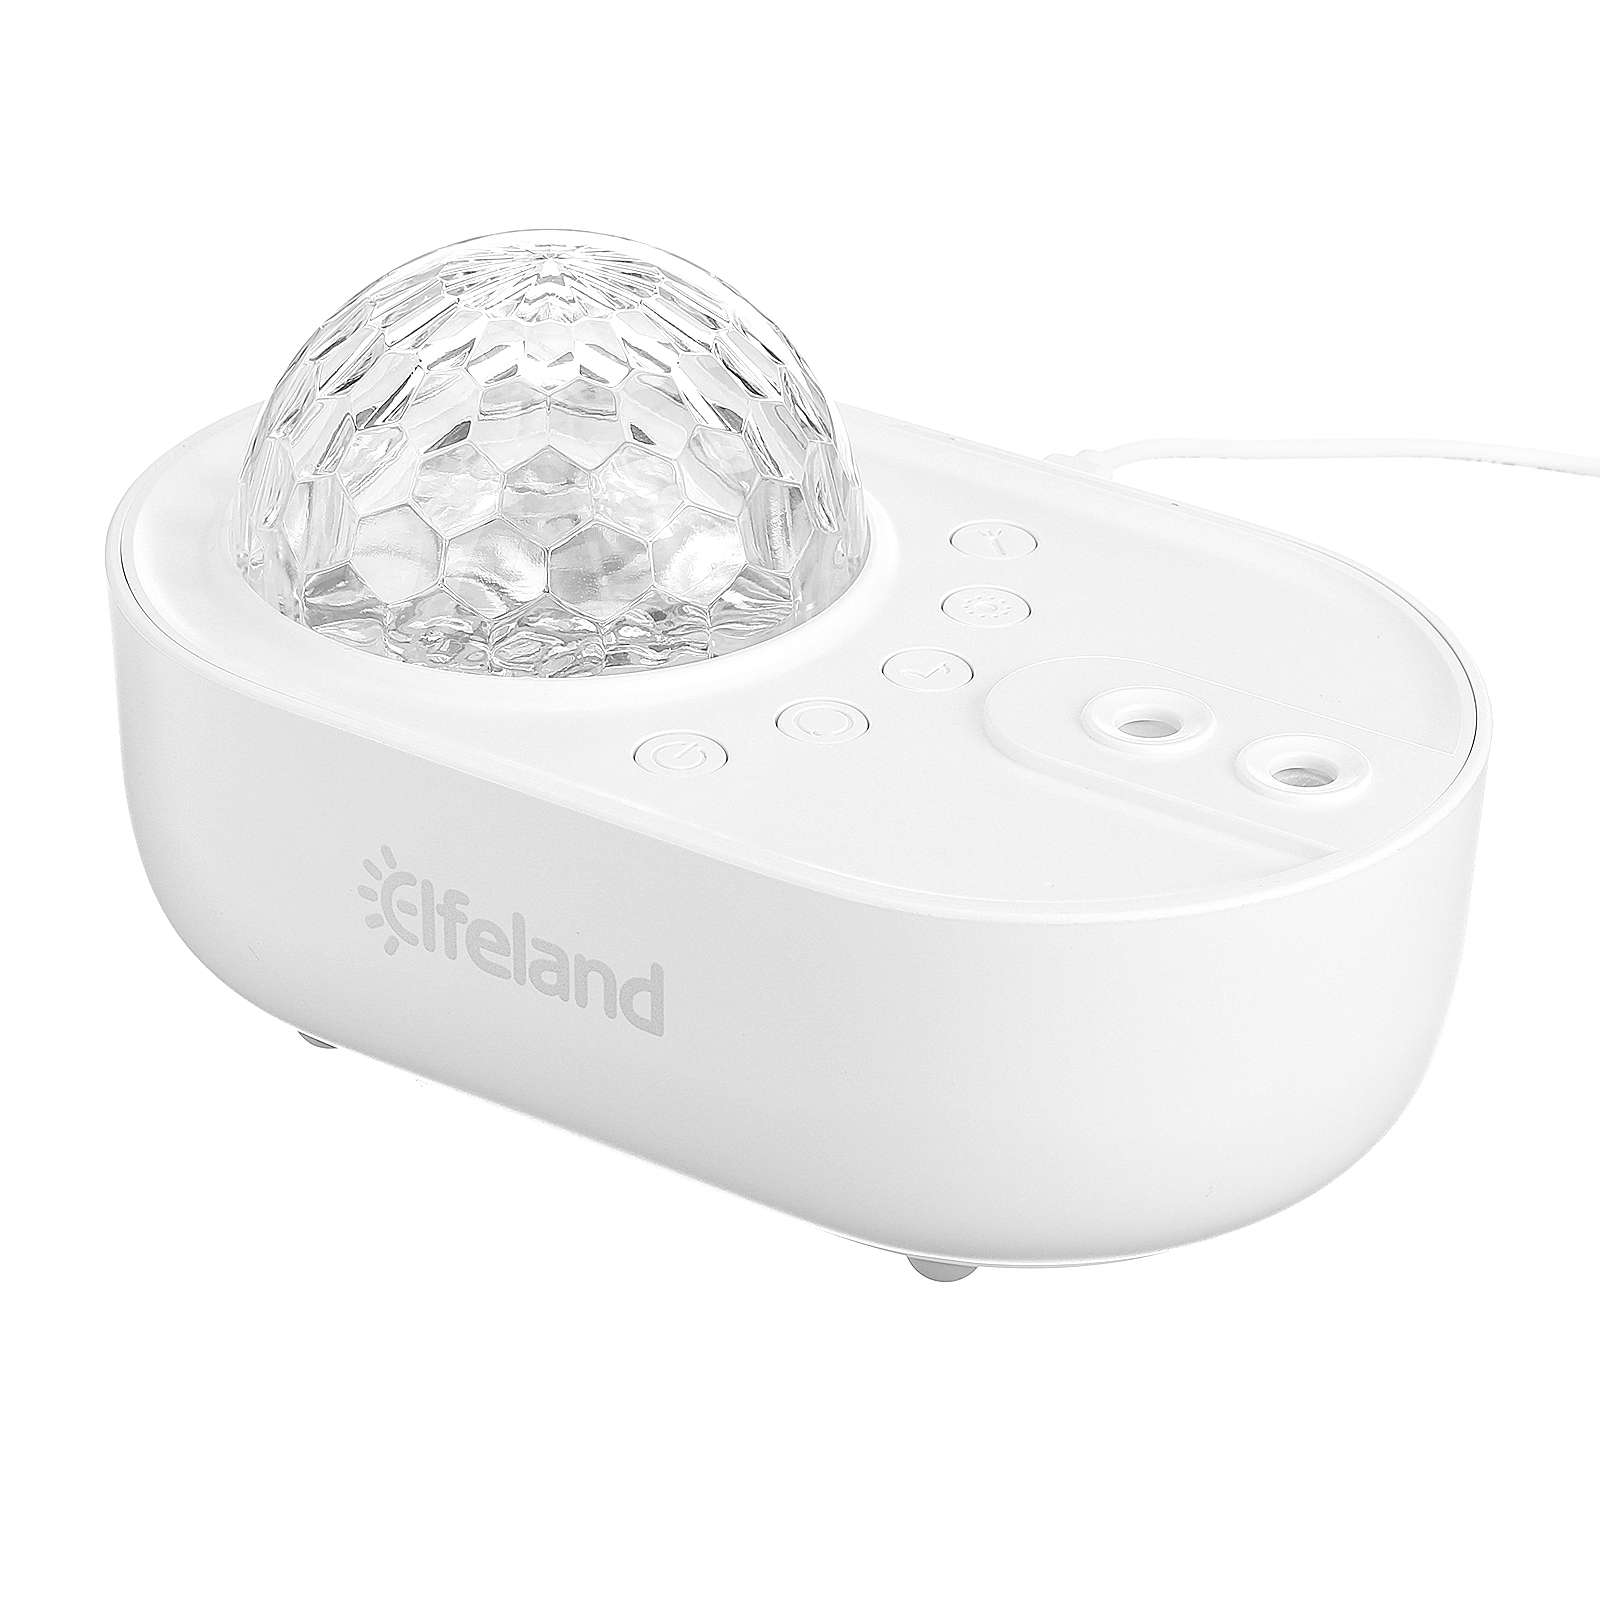 Elfeland-USB-LED-Starry-Light-Sky-Night-Galaxy-Projector-Music-Lamps-with-Remote-Control-1887025-12